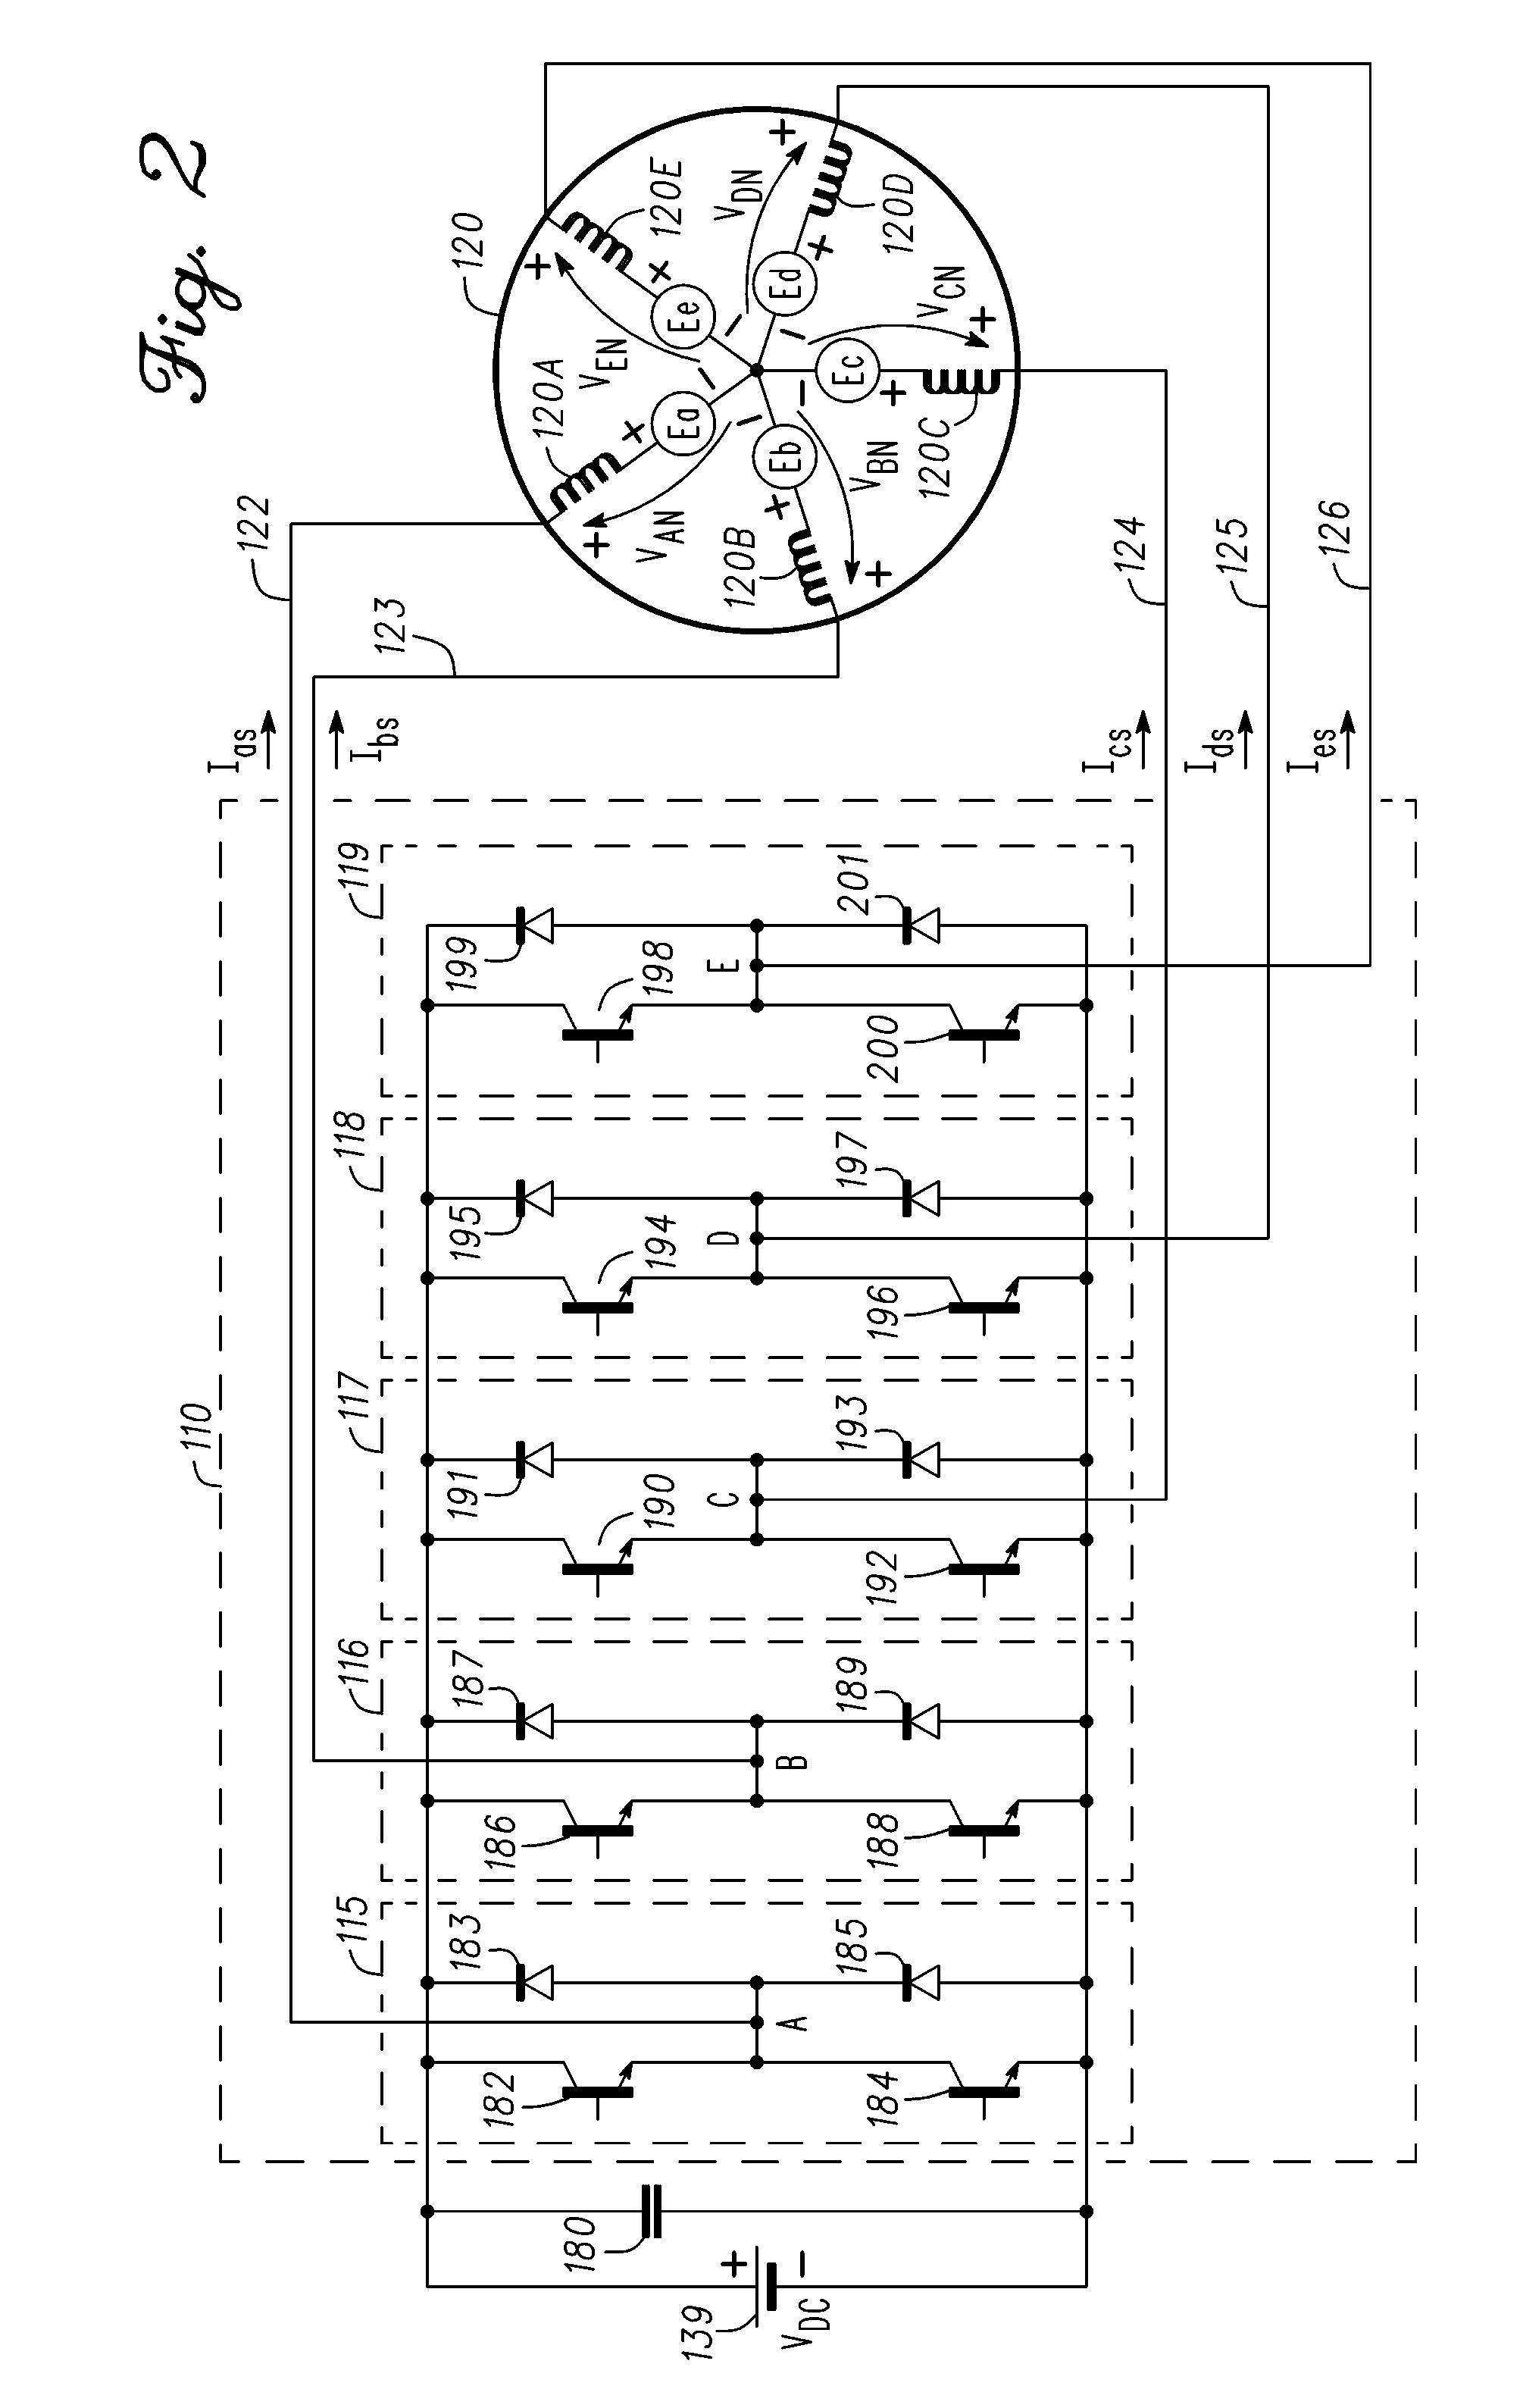 Methods, systems and apparatus for approximation of peak summed fundamental and third harmonic voltages in a multi-phase machine